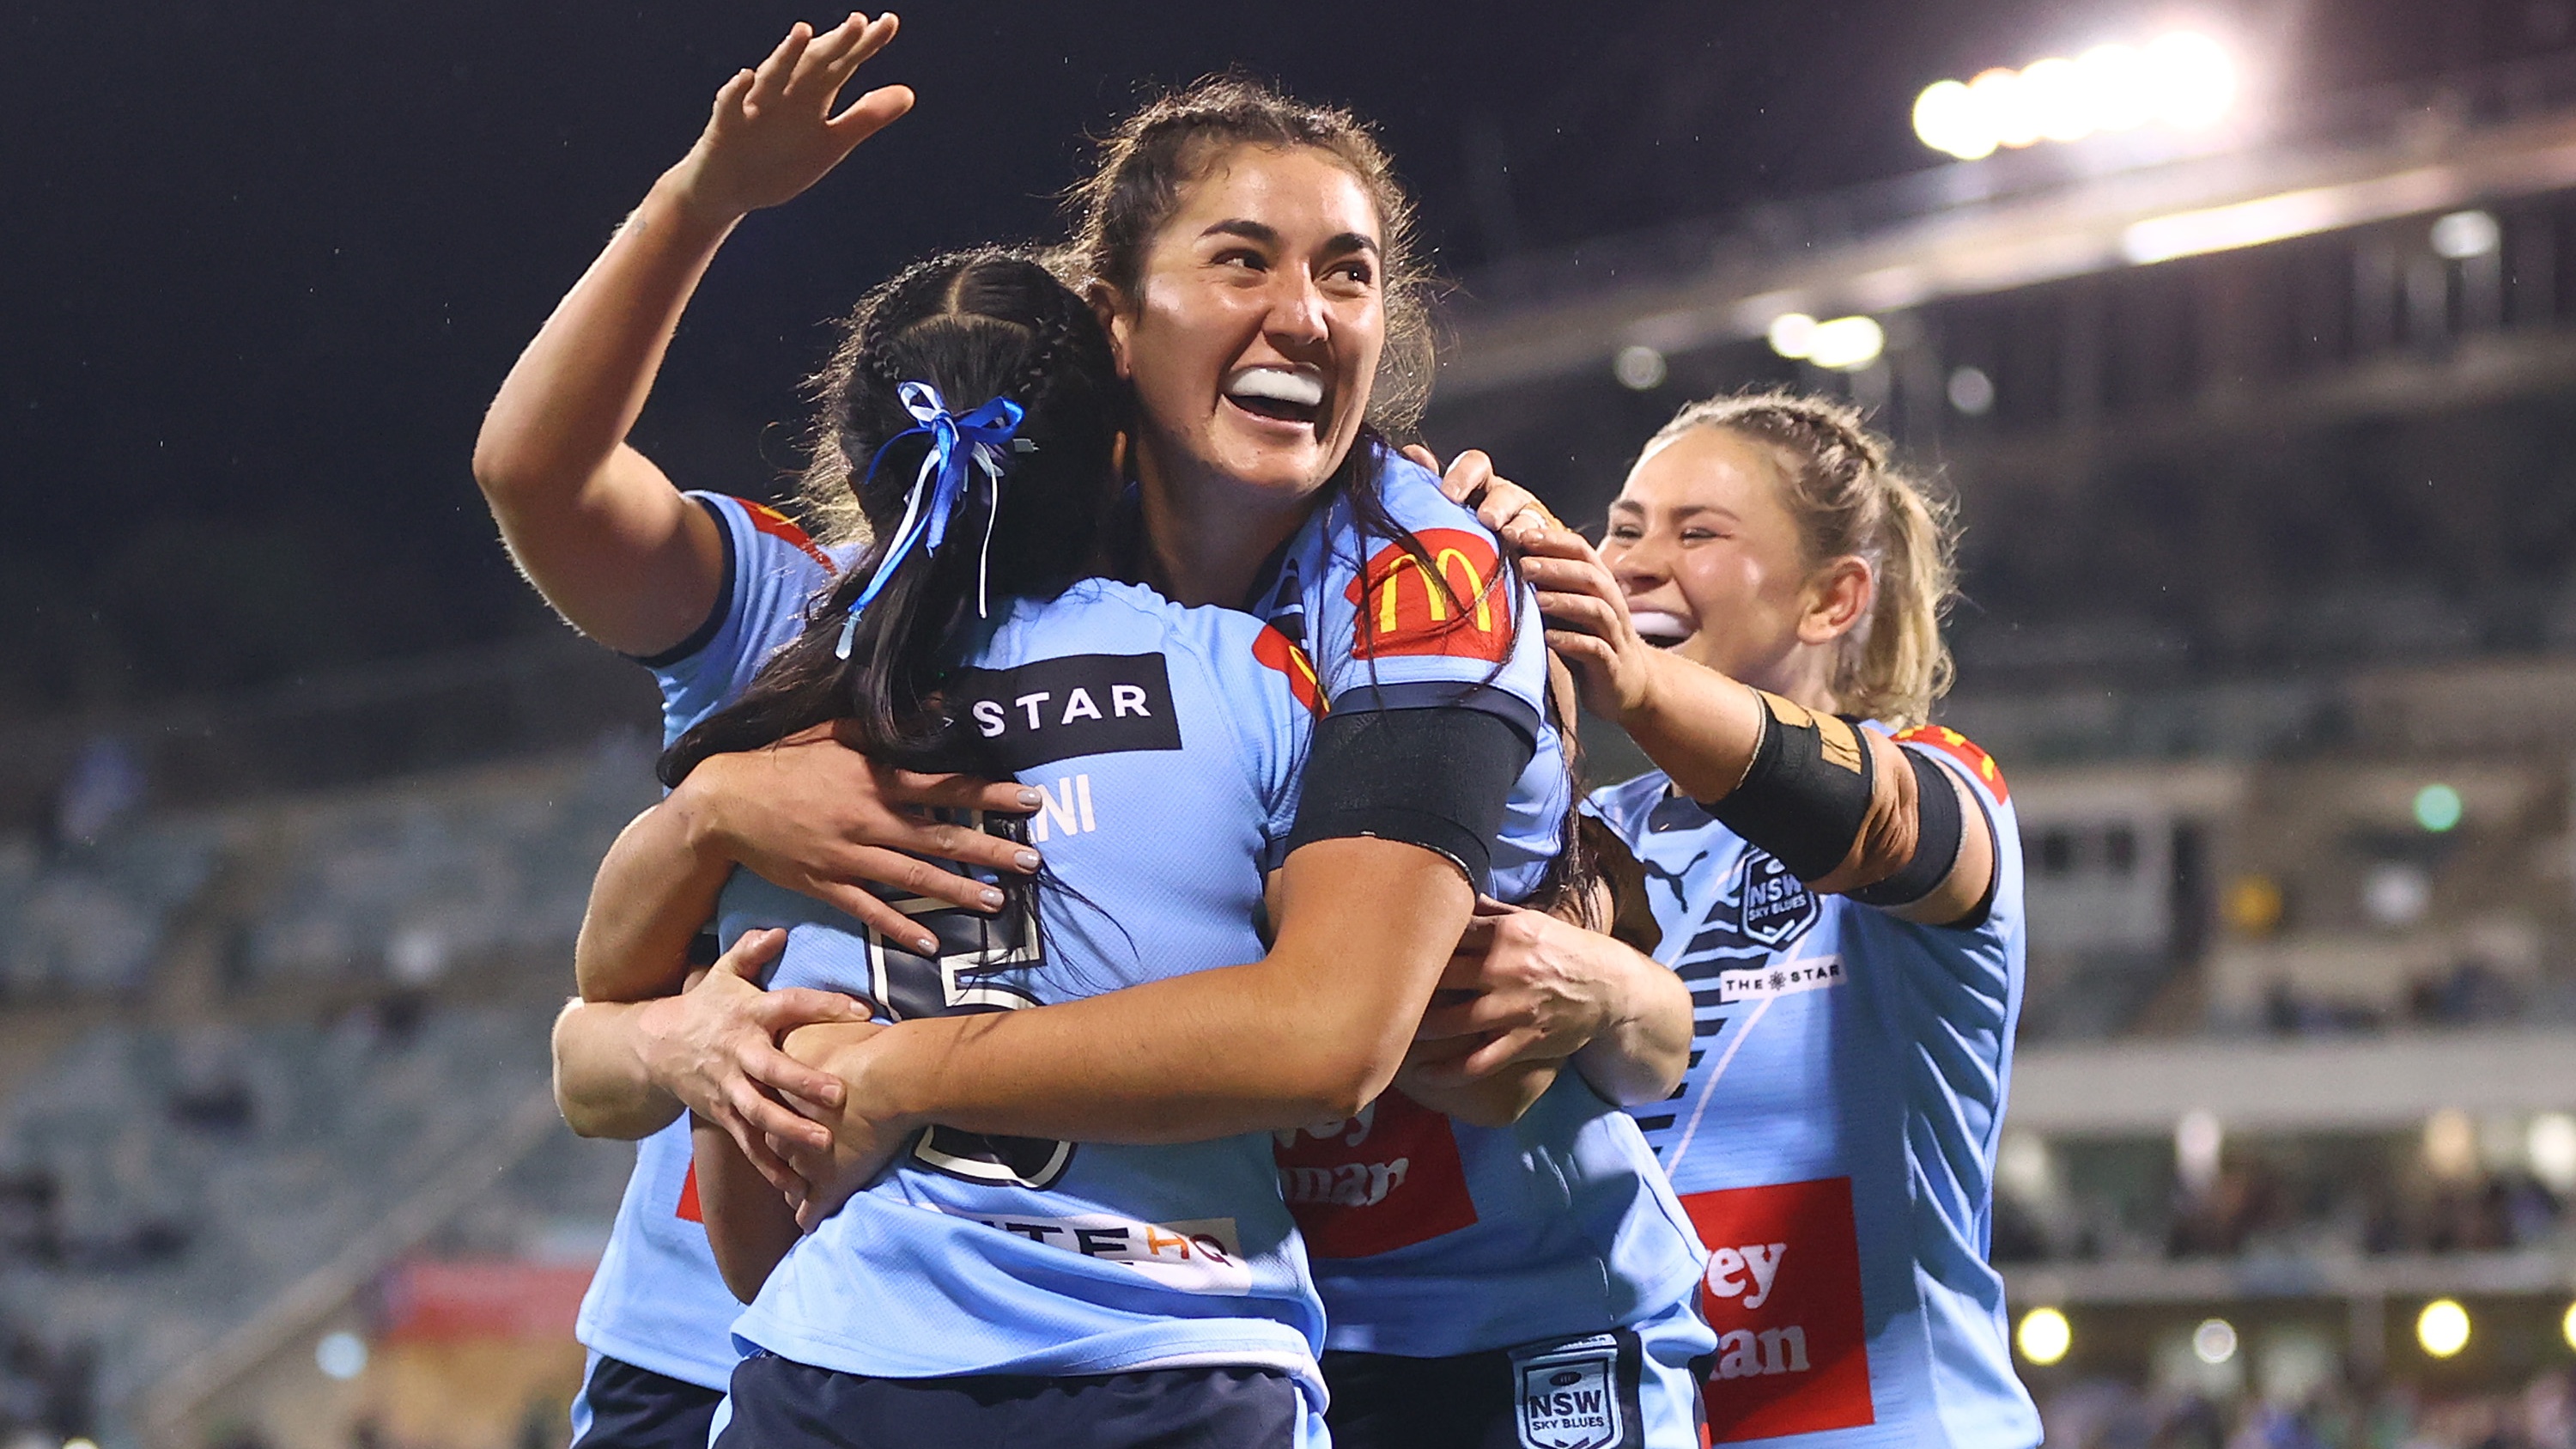 Women's State of Origin shield changes hands after thrilling match